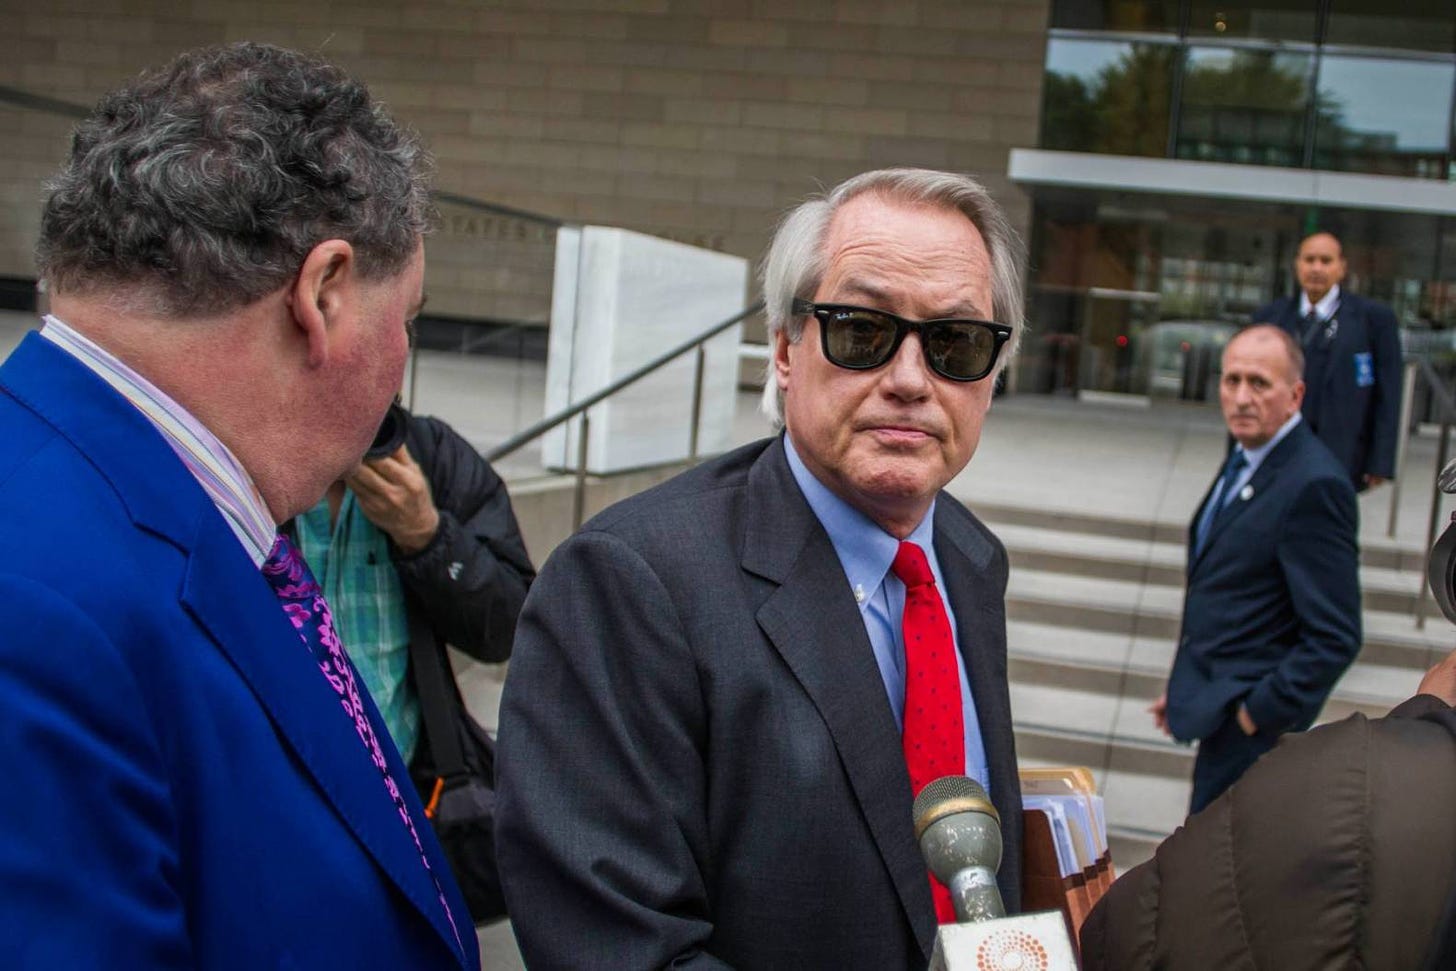 LOS ANGELES, CA - DECEMBER 03: Attorneys L. Lin Wood (C) and Mark Stephen (L) speak to the media about their client, British rescue diver Vernon Unsworth (rear), as they arrive at US District Court on December 3, 2019 in Los Angeles, California. Unsworth is suing Tesla CEO Elon Musk for defamation over calling him "Pedo Guy" and rapist. (Photo by Apu Gomes/Getty Images)